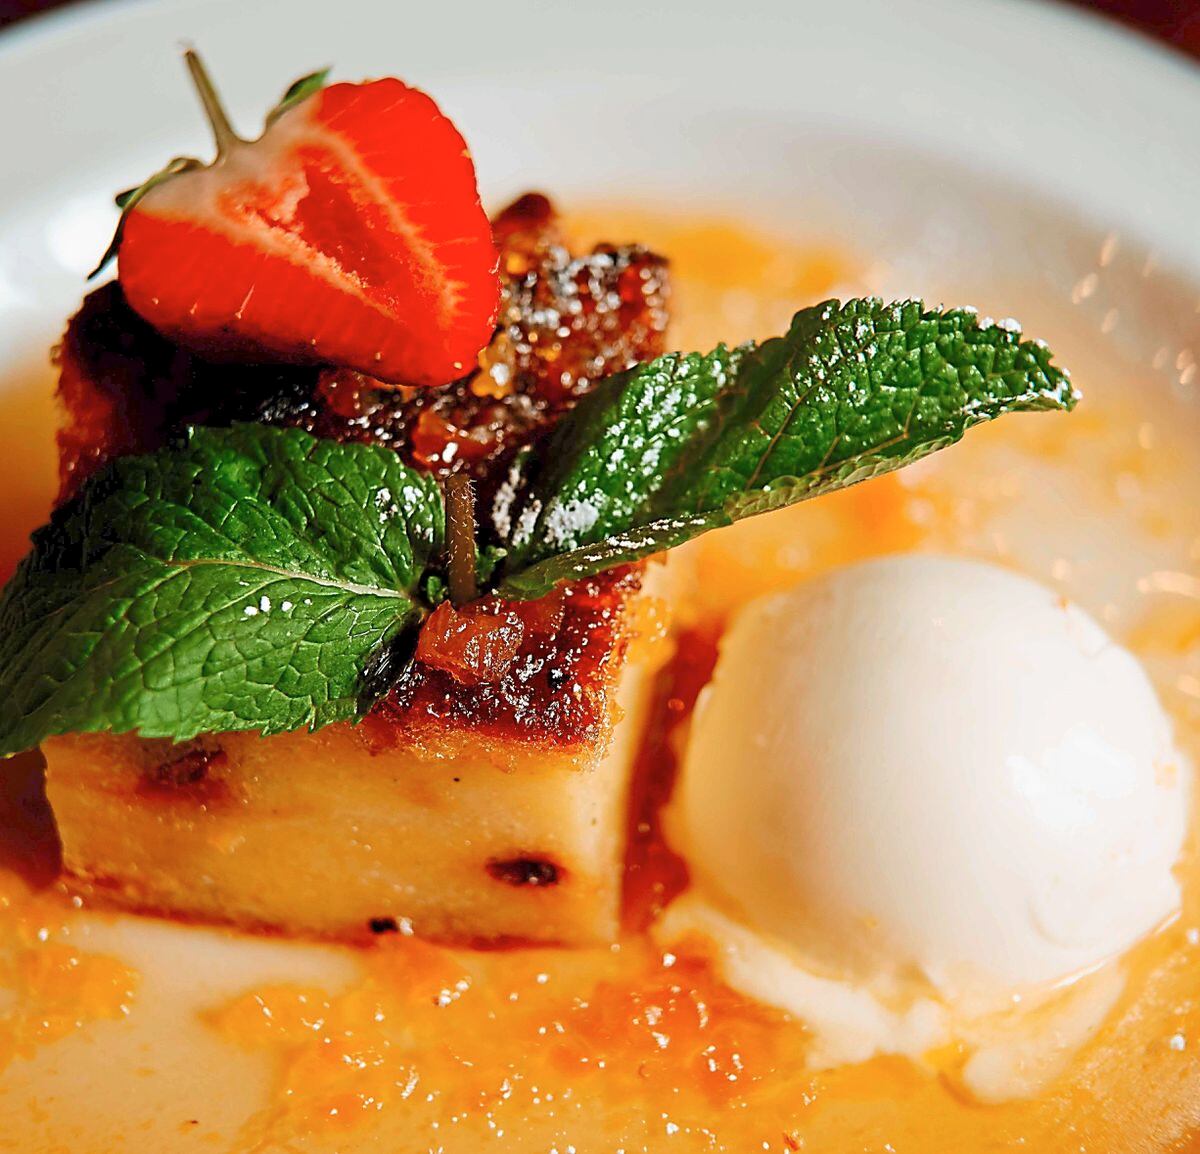 The bread and butter pudding with apricot sauce